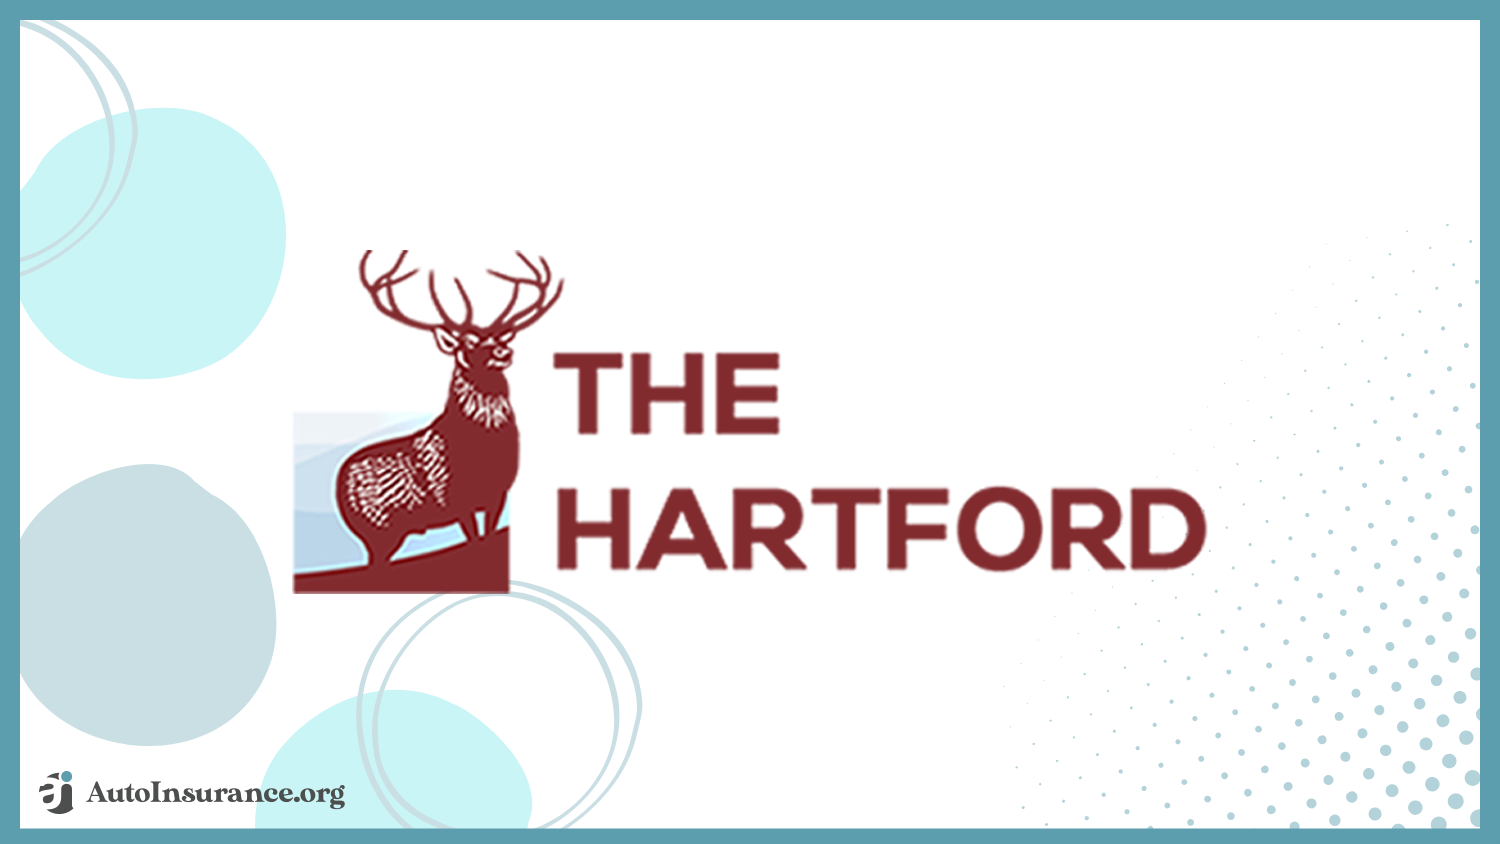 The Hartford: Best Auto Insurance for Reliability